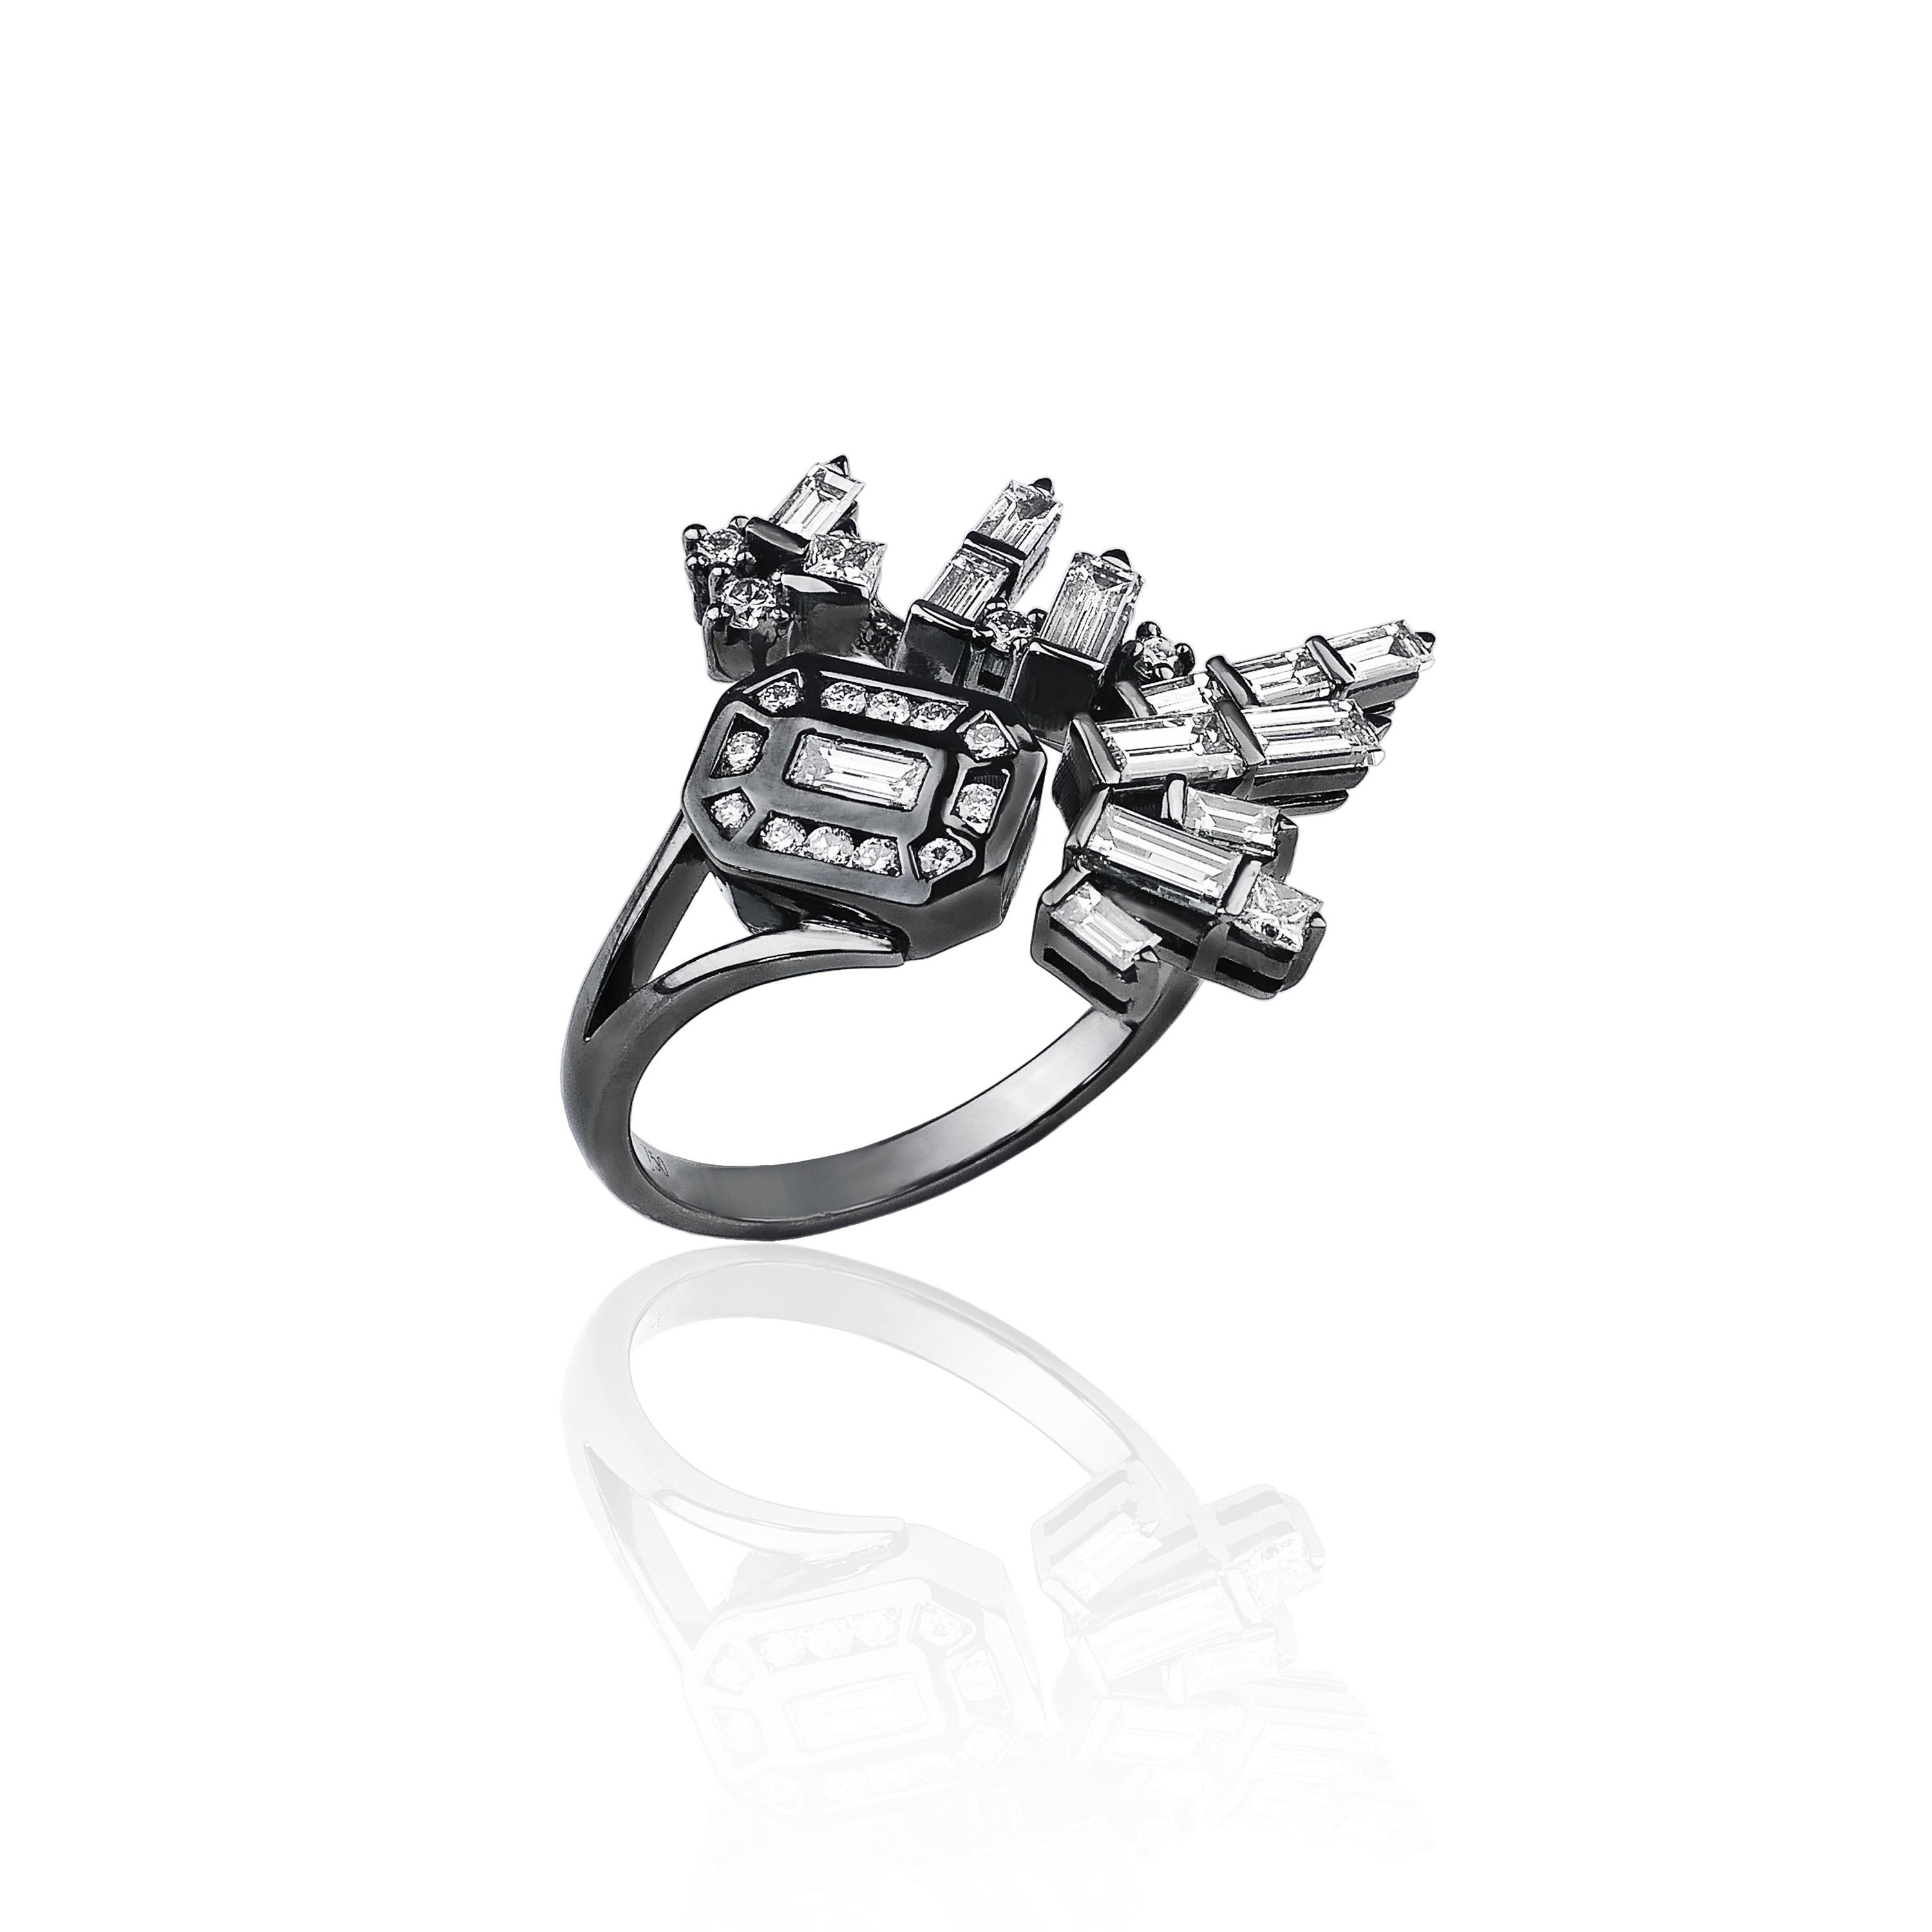 The Cosmic jewellery creations gather baguette, round and square-cut diamonds, coming together in a sparkling constellation.
Made of 18K white gold, each piece has black rhodium plating enhancing the radiance of the white diamonds, while echoing the